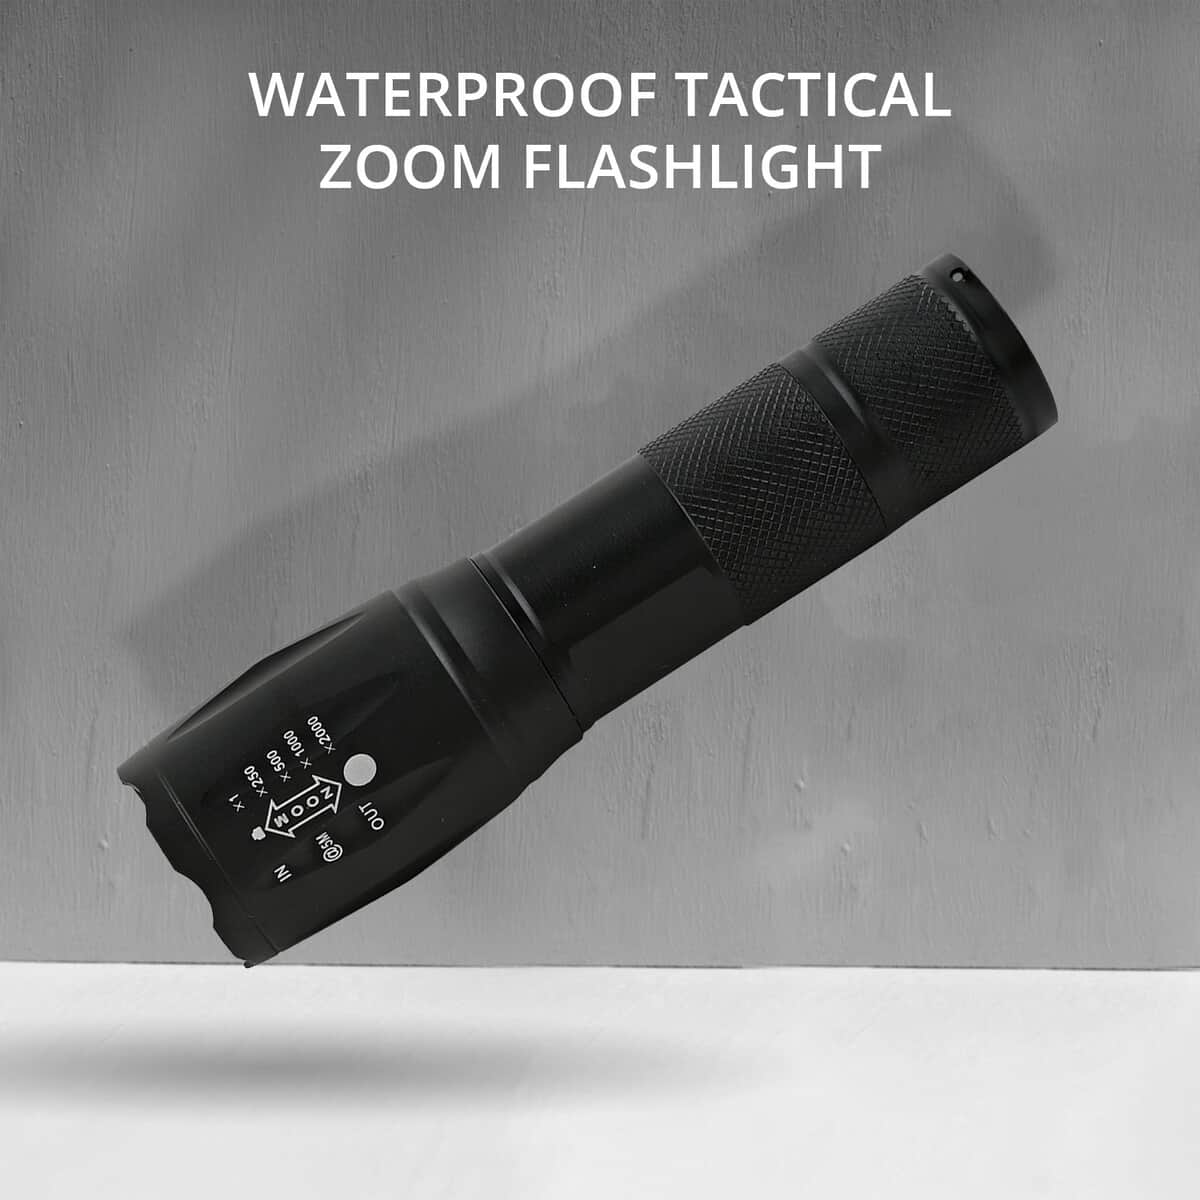 LED Tactical Flashlight Rechargeable, Waterproof, Zoomable, 5-Speed Mode Pocket-Size Flash Light For Camping, Hiking, Emergency Use image number 1